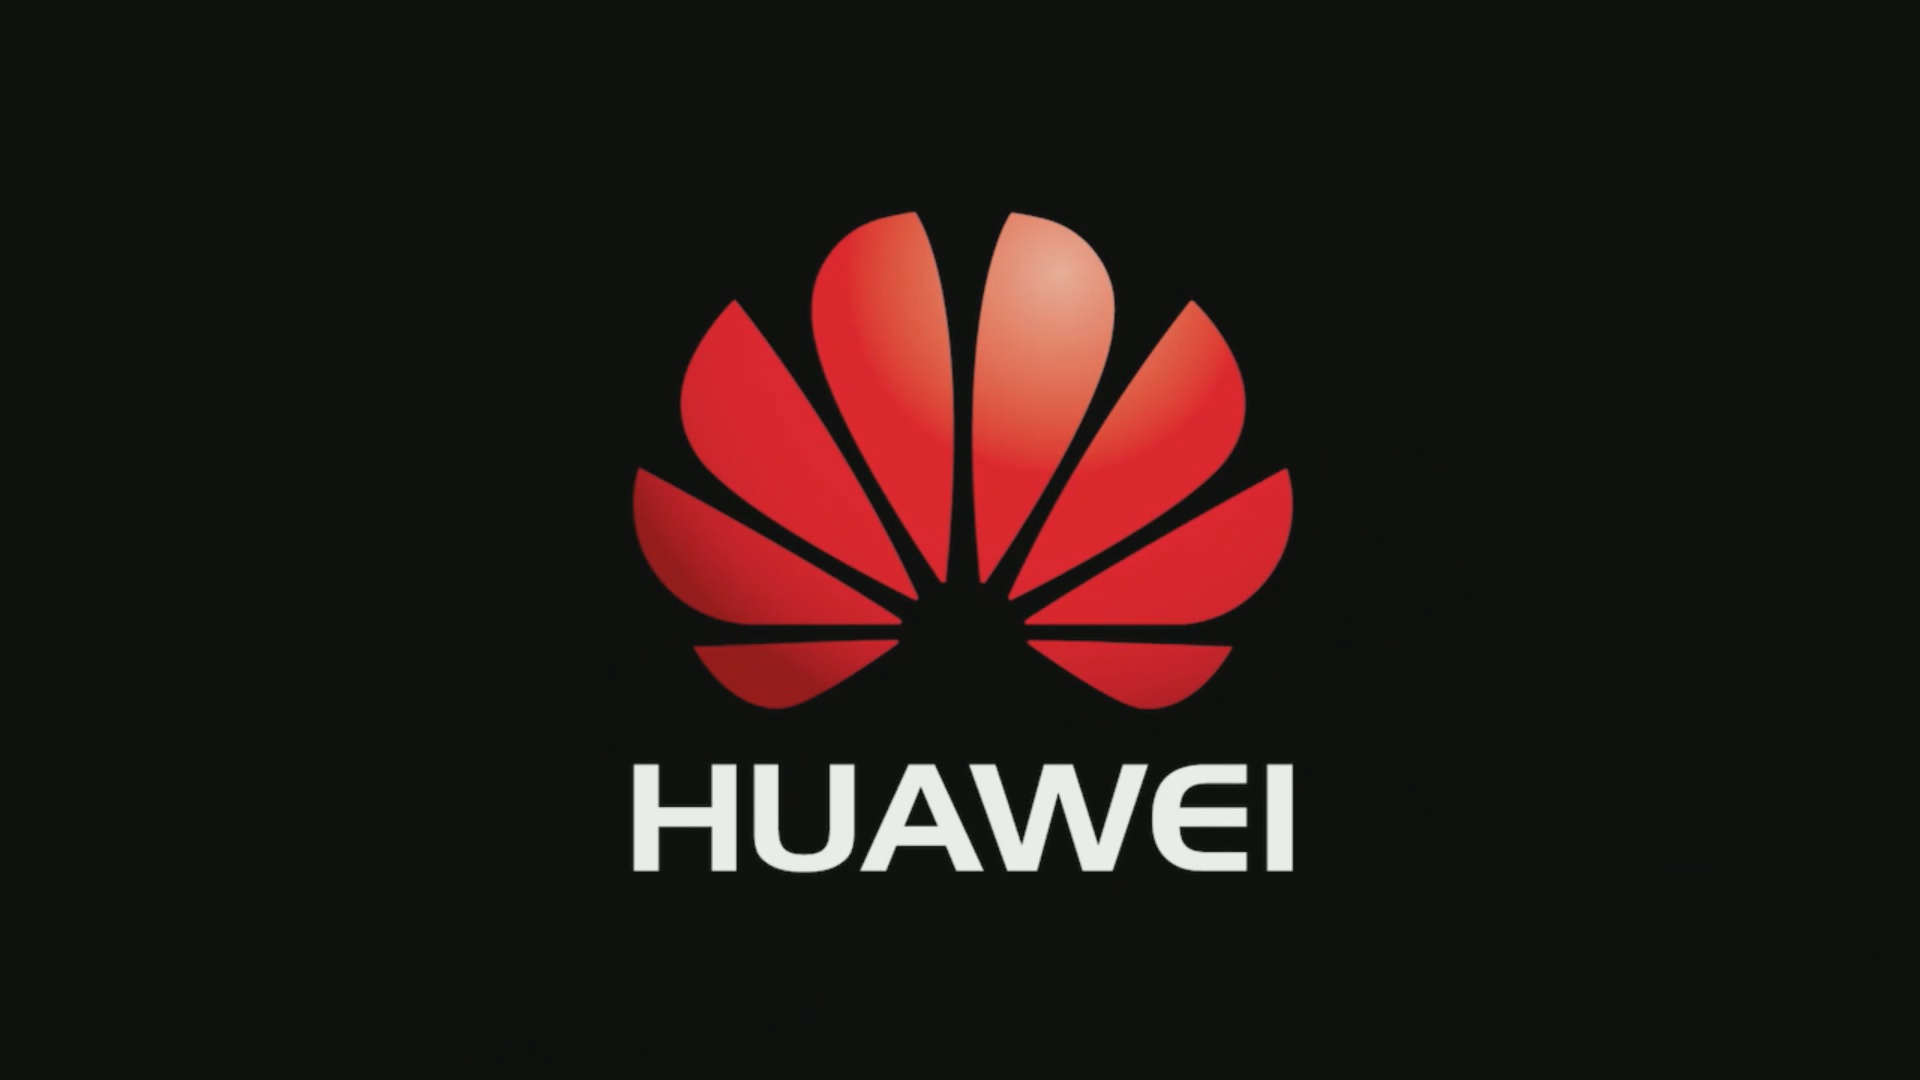 Fixed - Sound Not Works on Huawei Impulse 4G